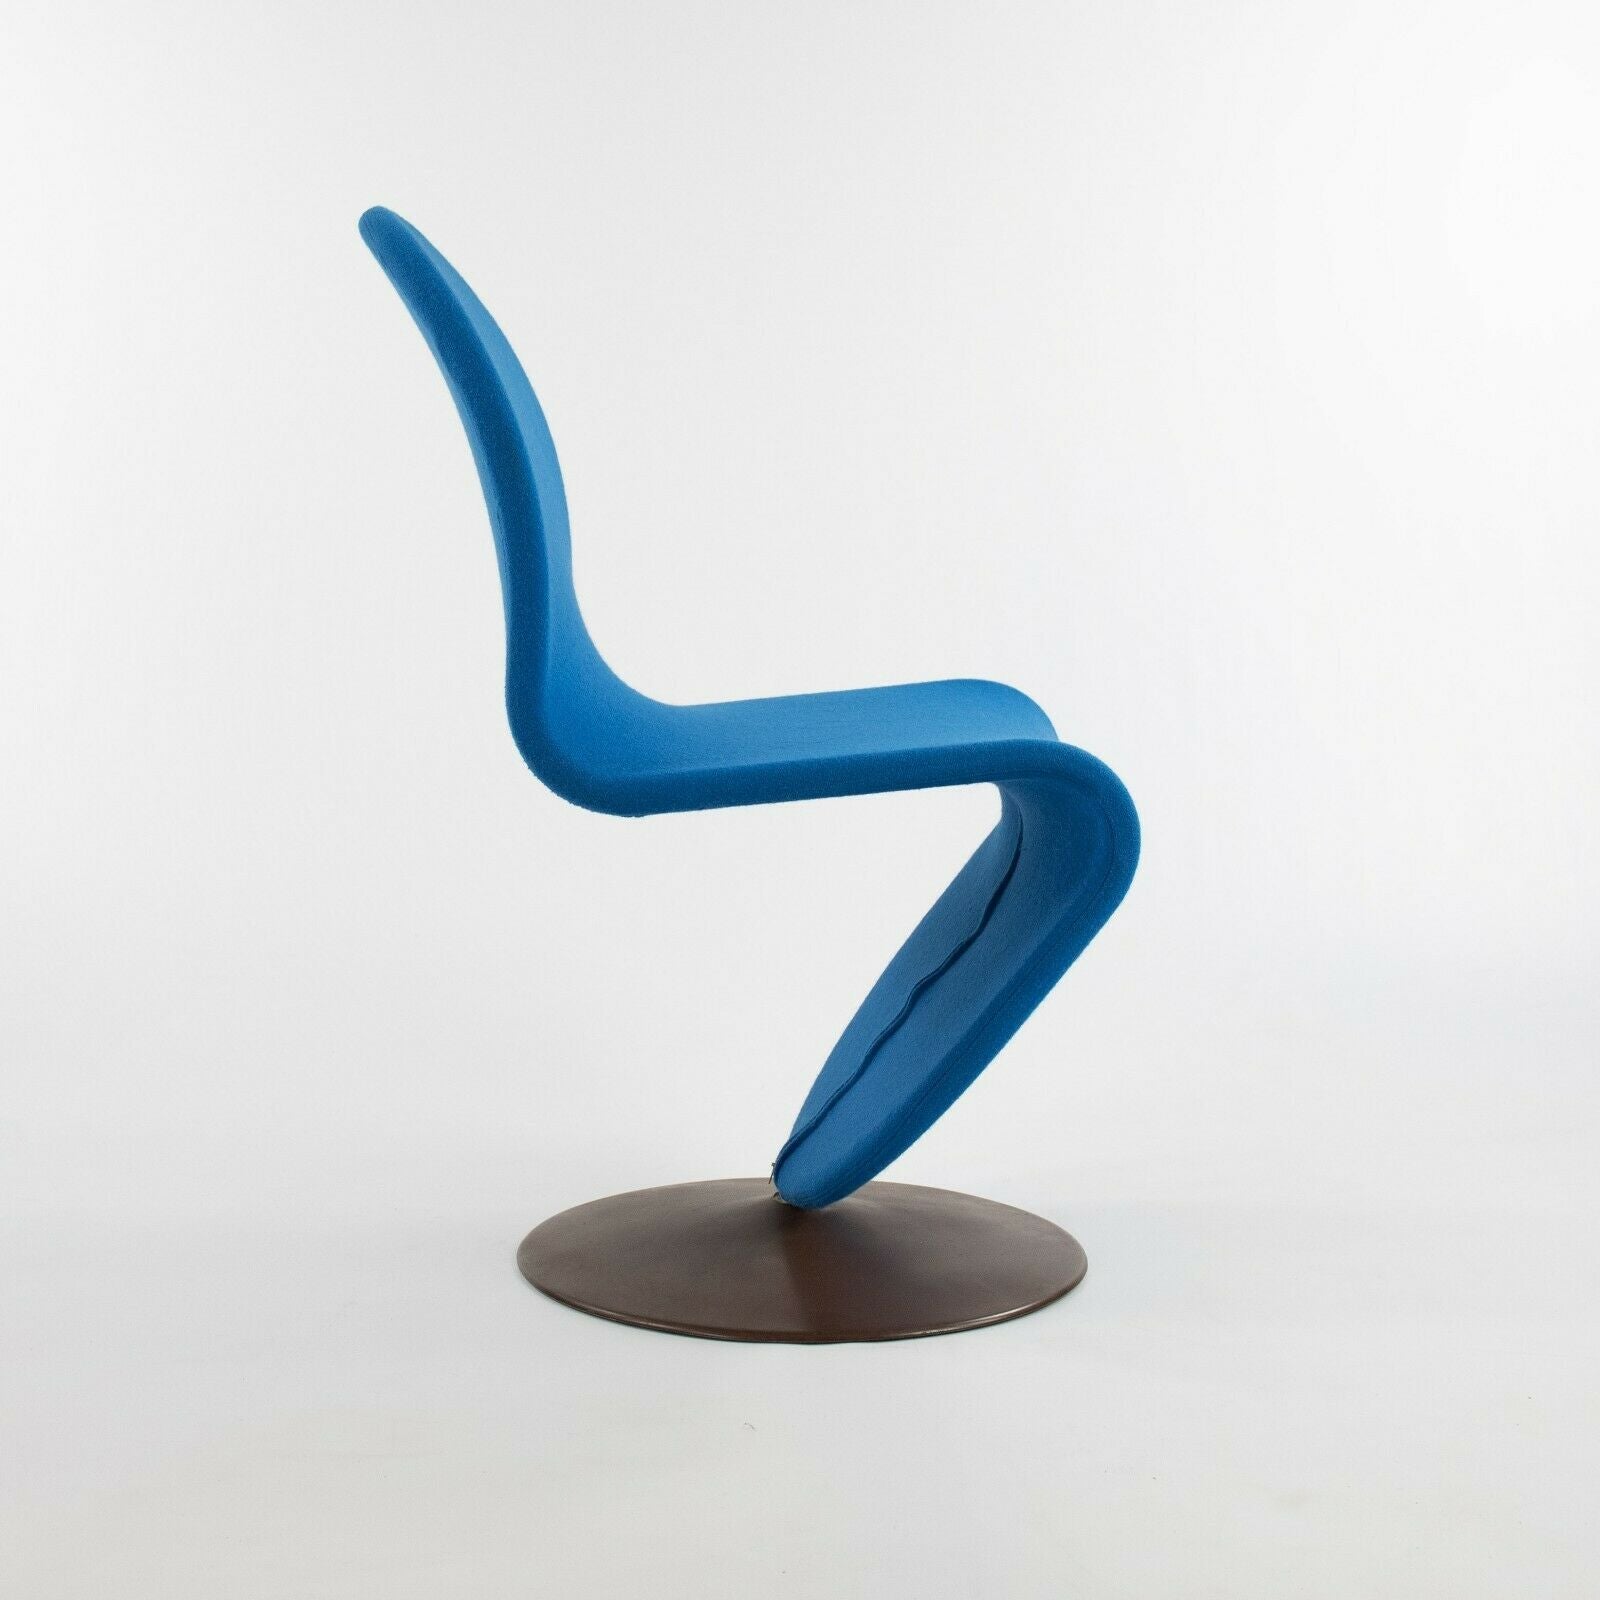 1970s Verner Panton for Fritz Hansen 1- 2 - 3 Dining Side Chair in Blue Fabric with Original Label